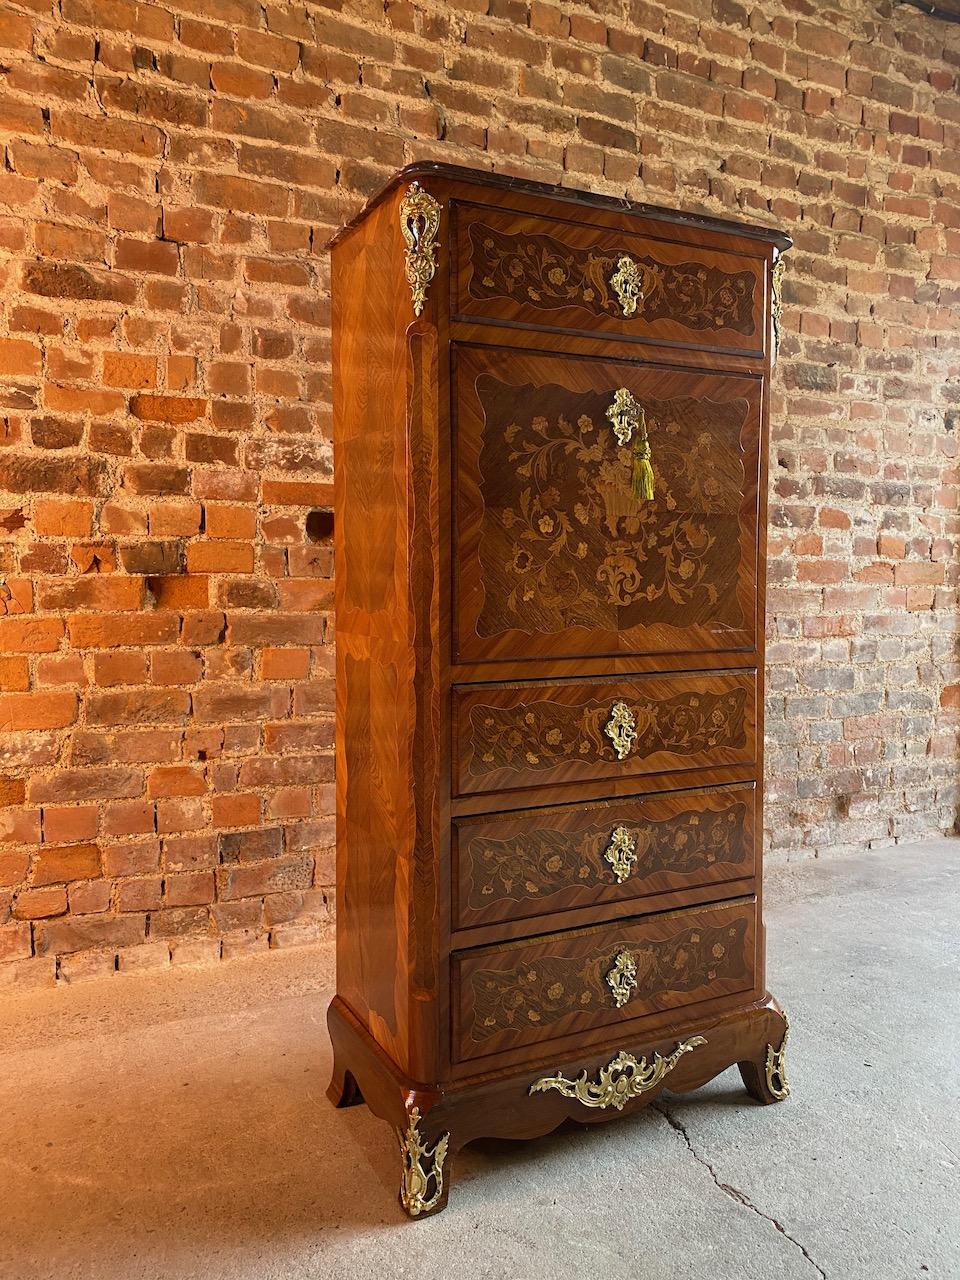 Antique French Kingwood & Mahogany Secretaire Abbatant 19th century Napoleon III In Good Condition For Sale In Longdon, Tewkesbury